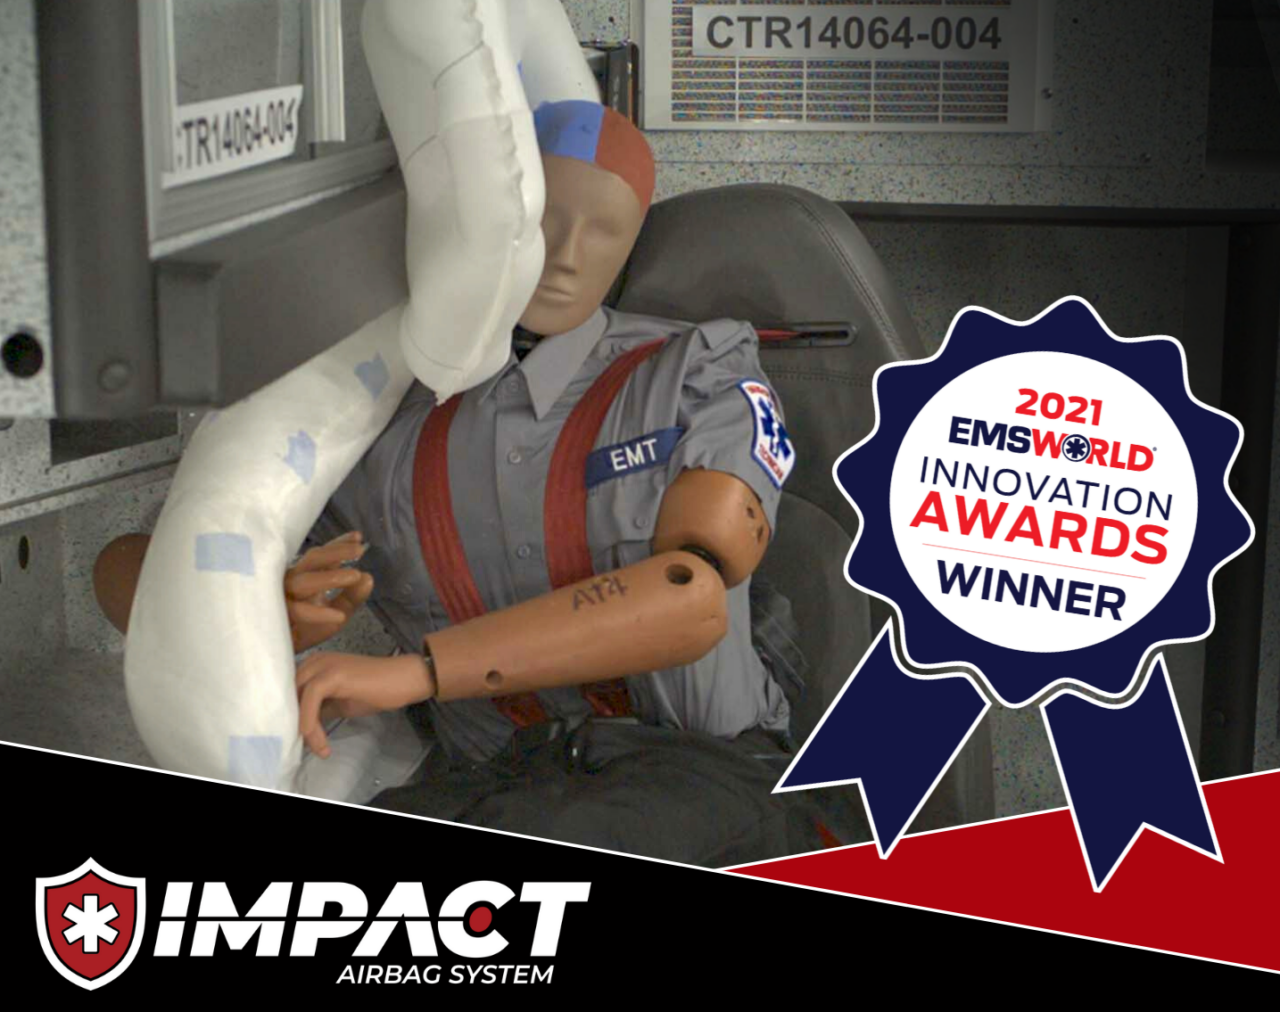 Braun Recognized as a Leader in Ambulance Safety with Latest Award for IMPACT Airbag System